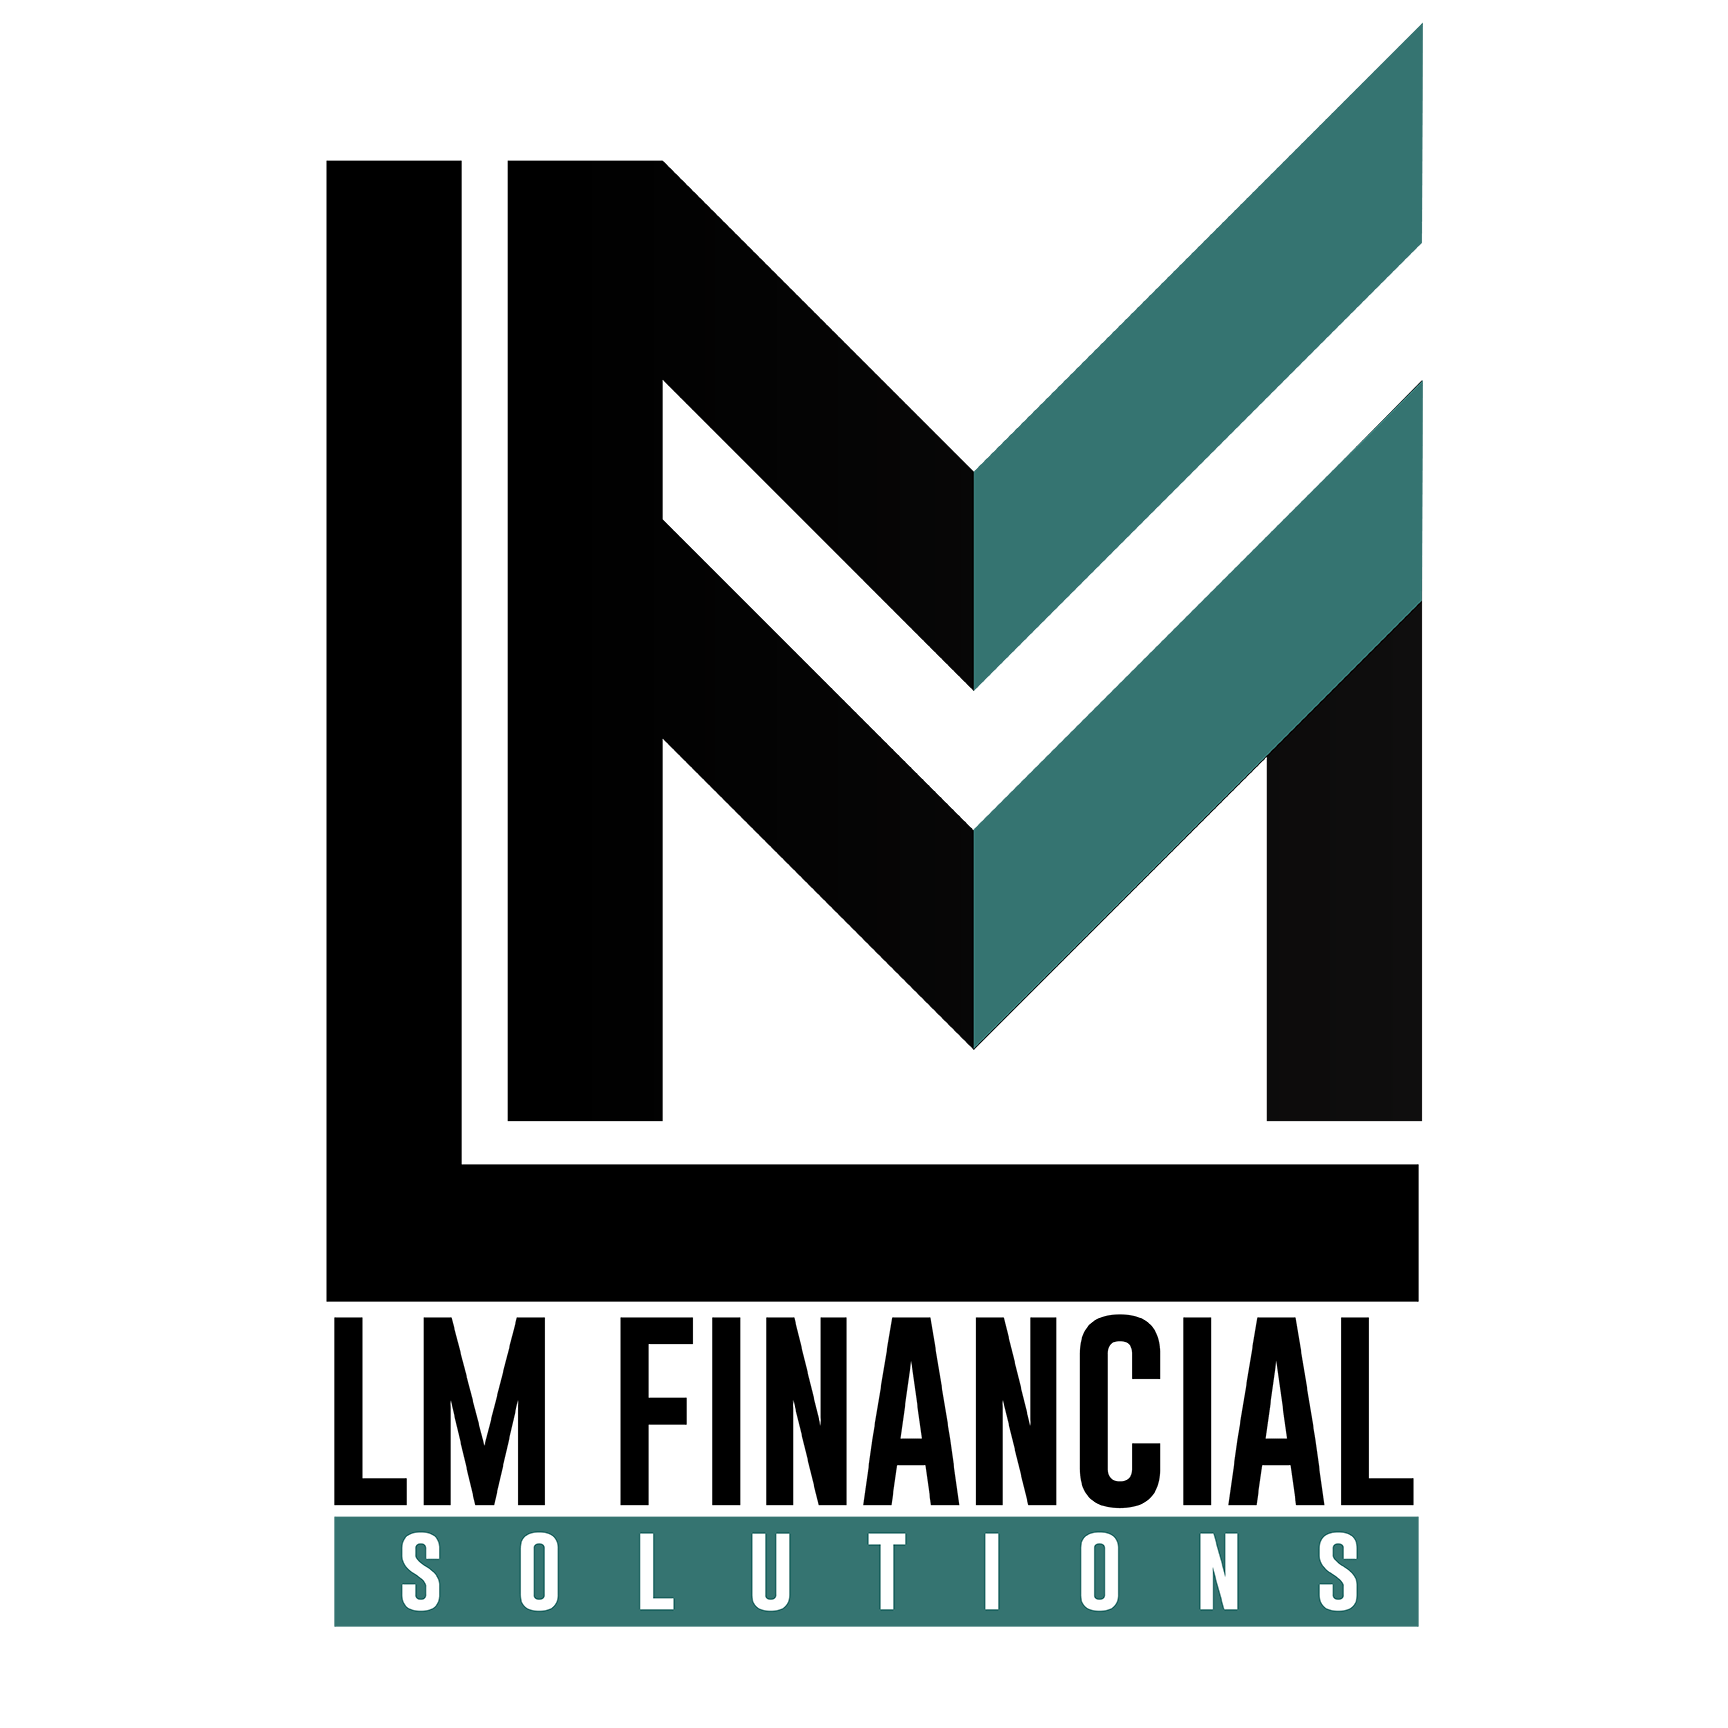 LM Financial Solutions | Finance Cleanup, Management, Reporting